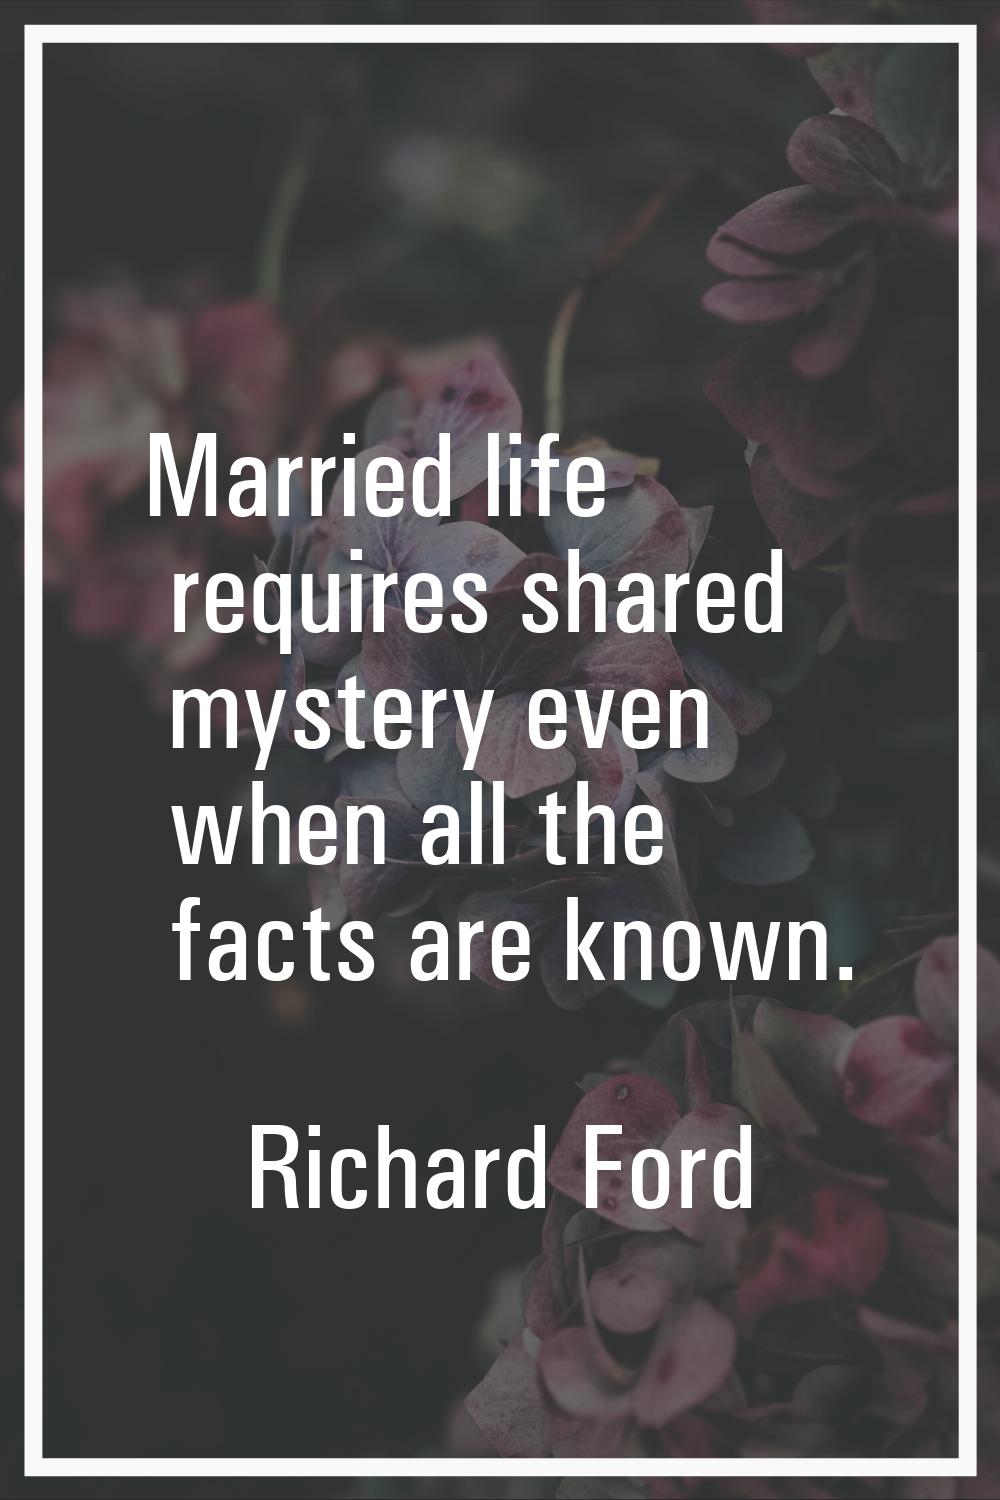 Married life requires shared mystery even when all the facts are known.